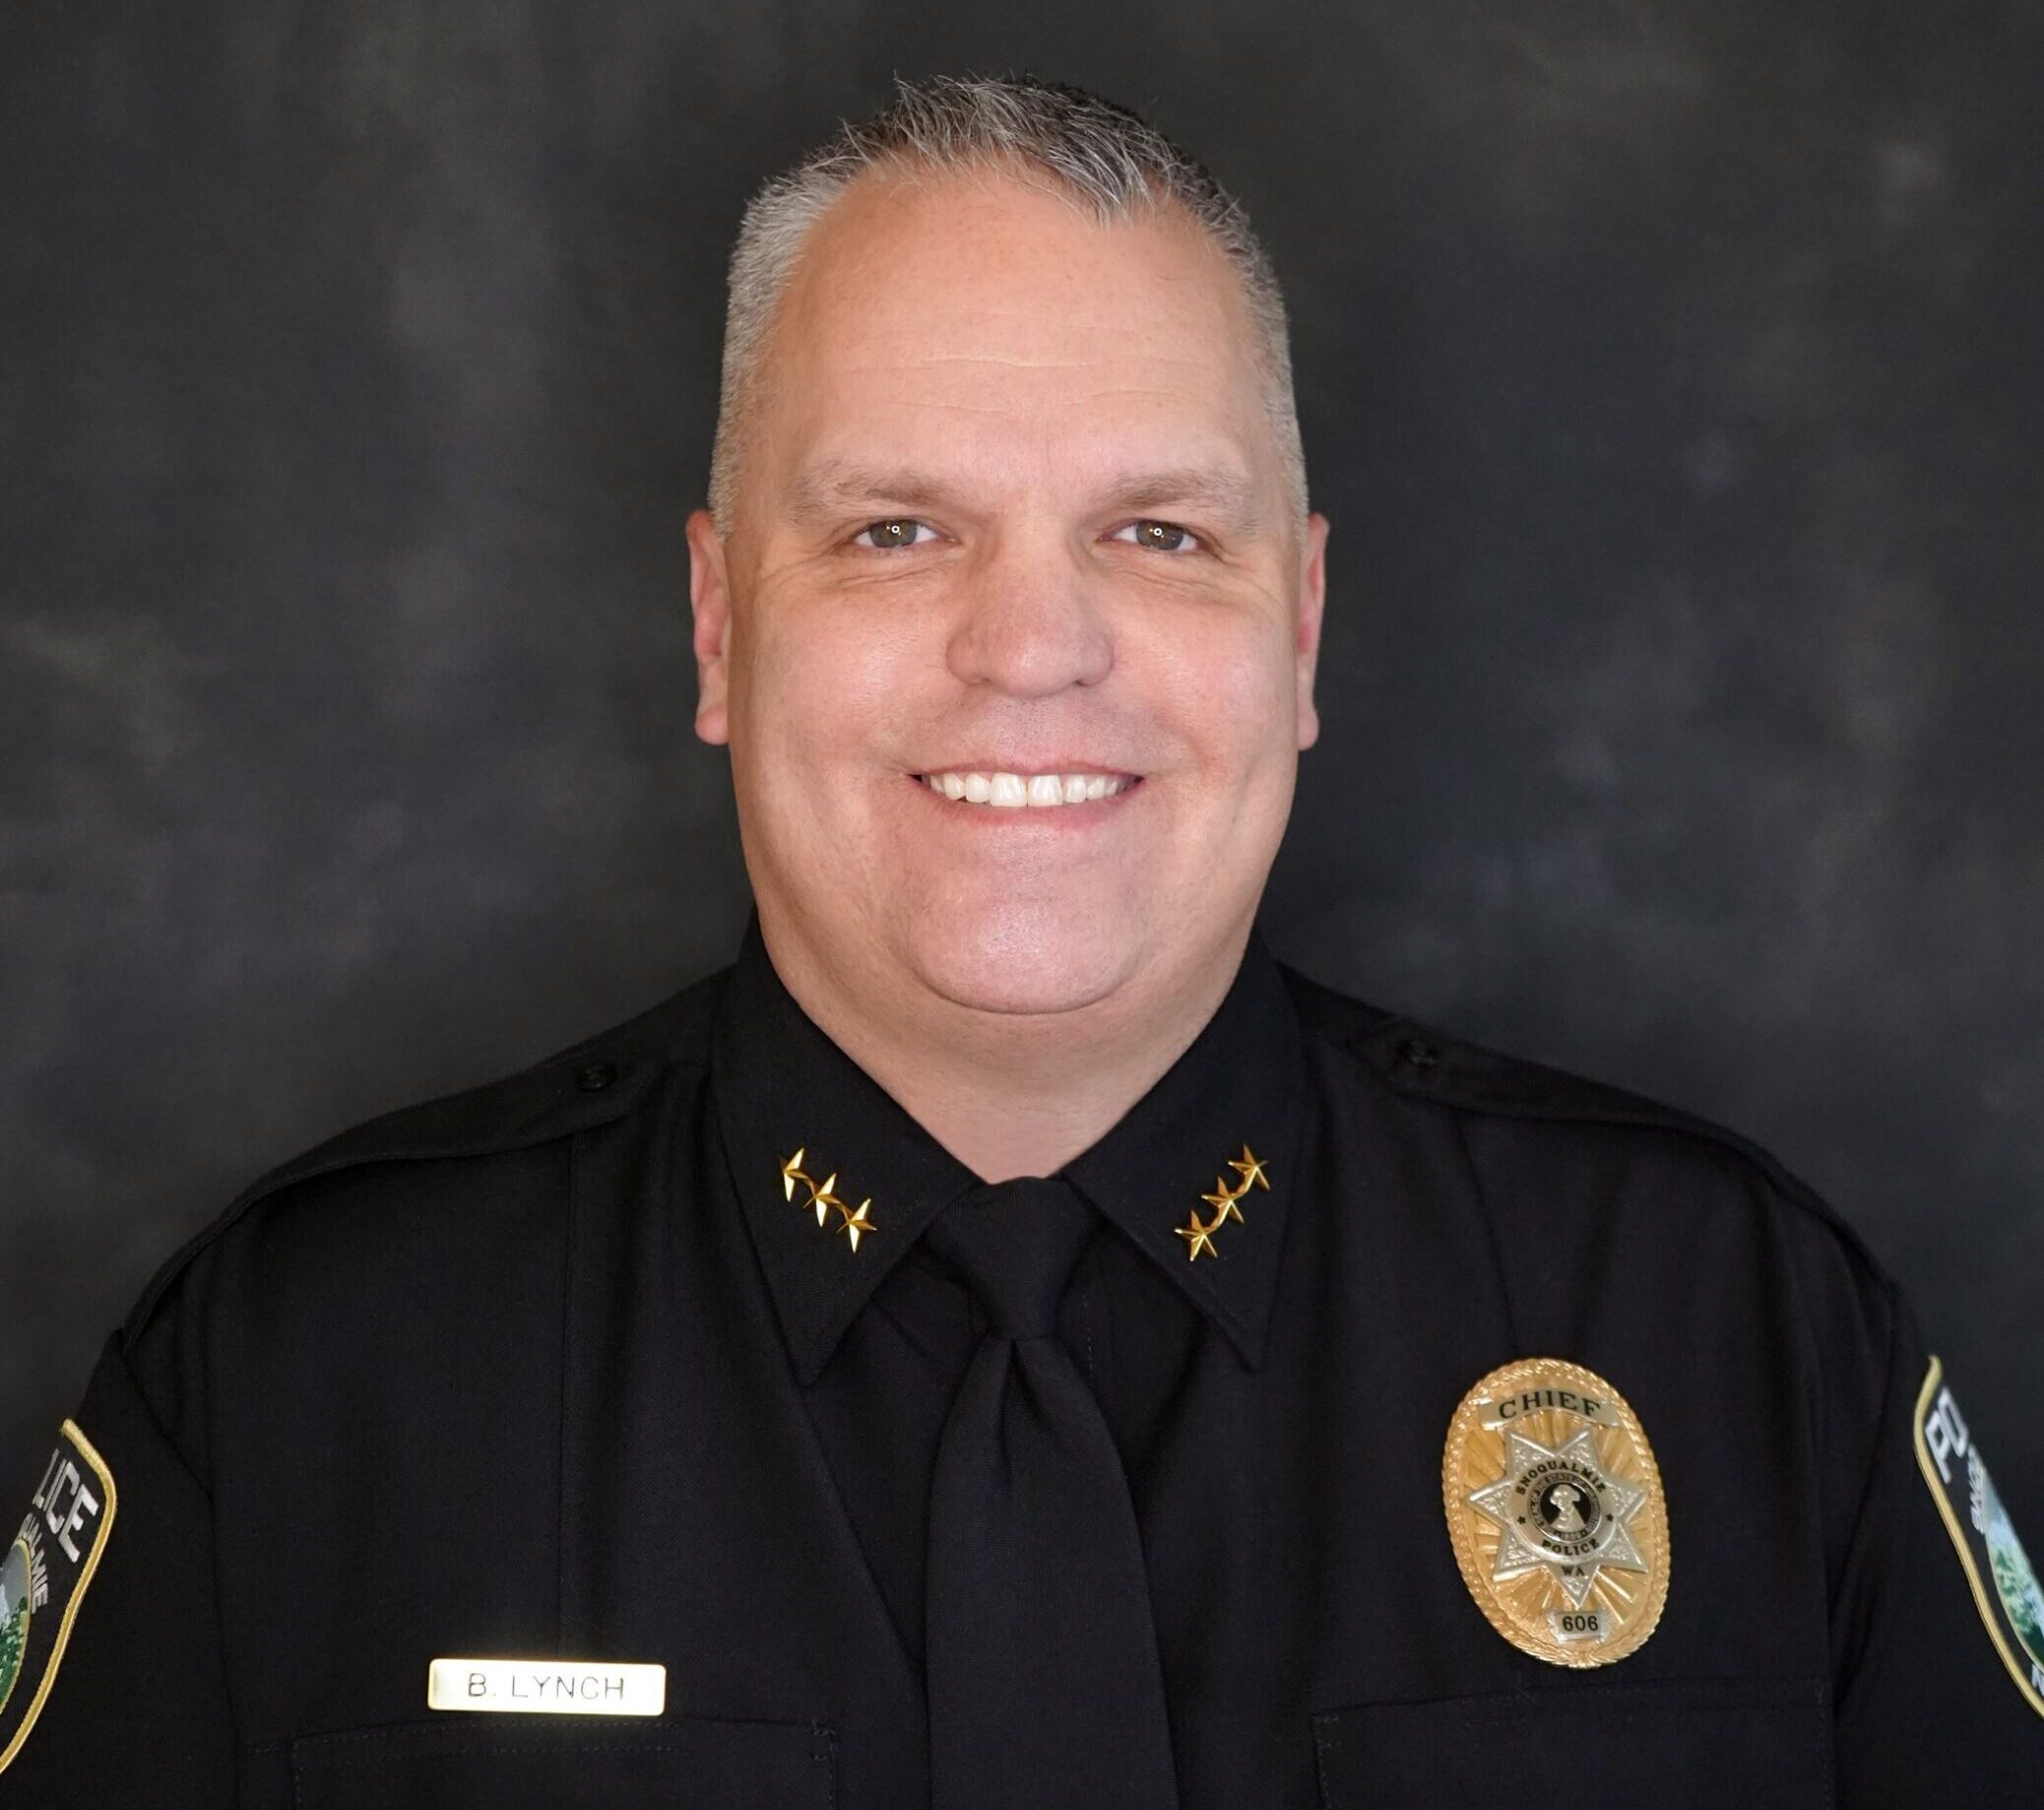  Important Update on Police Pursuit Law: A Message from Chief Lynch - Living Snoqualmie 